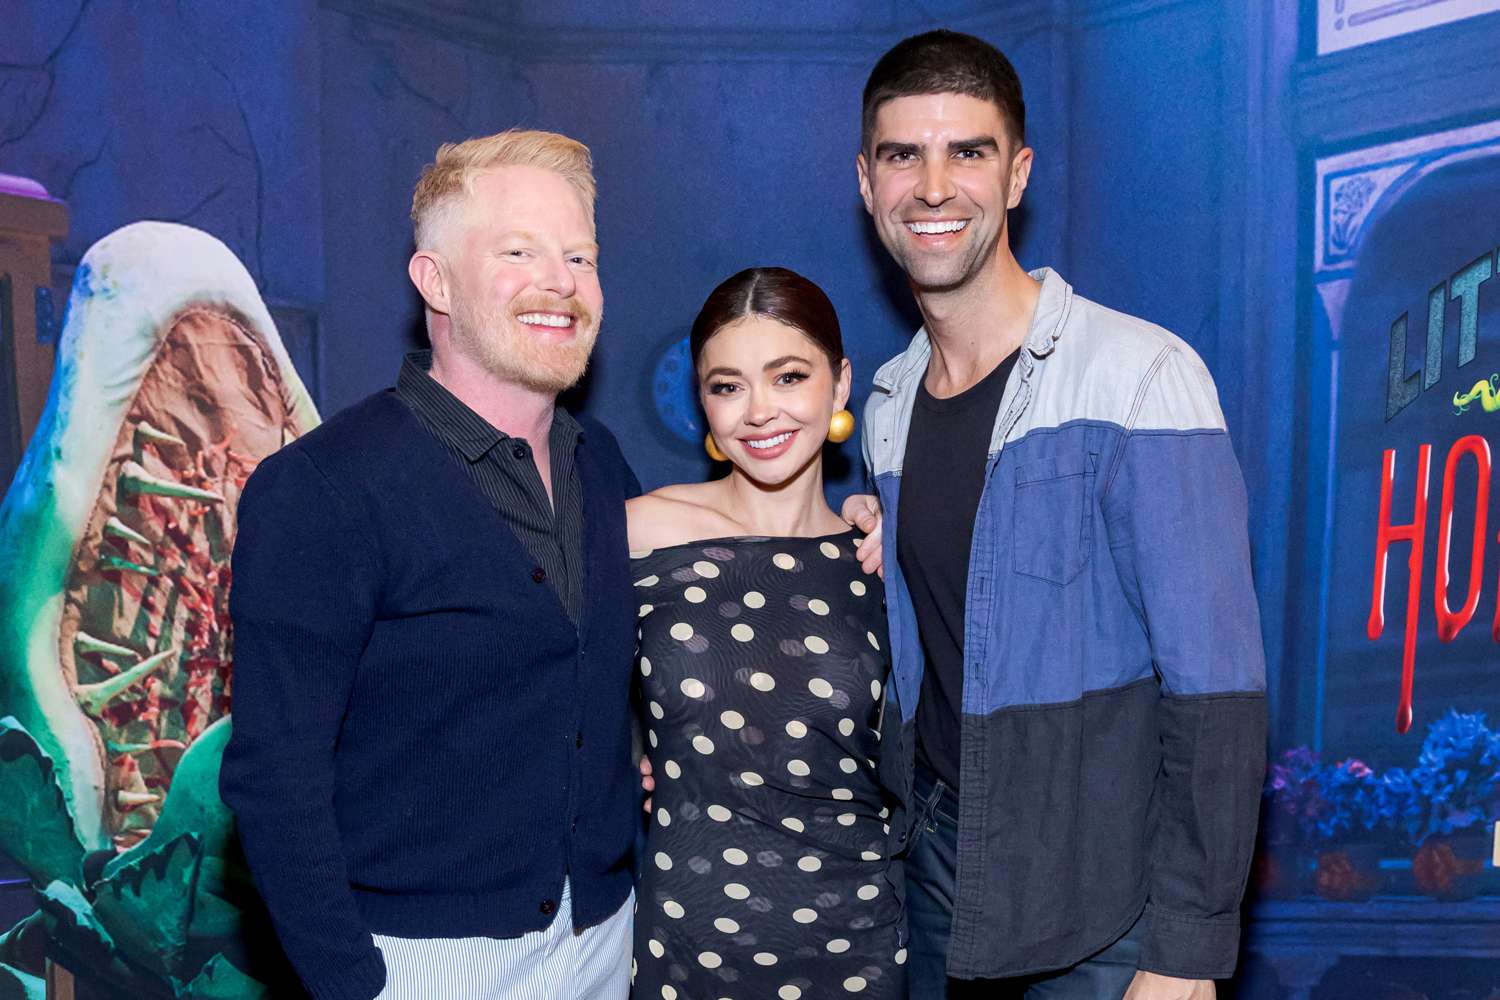 Modern Family Reunion! Jesse Tyler Ferguson Supports Sarah Hyland After Her Little Shop of Horrors Debut